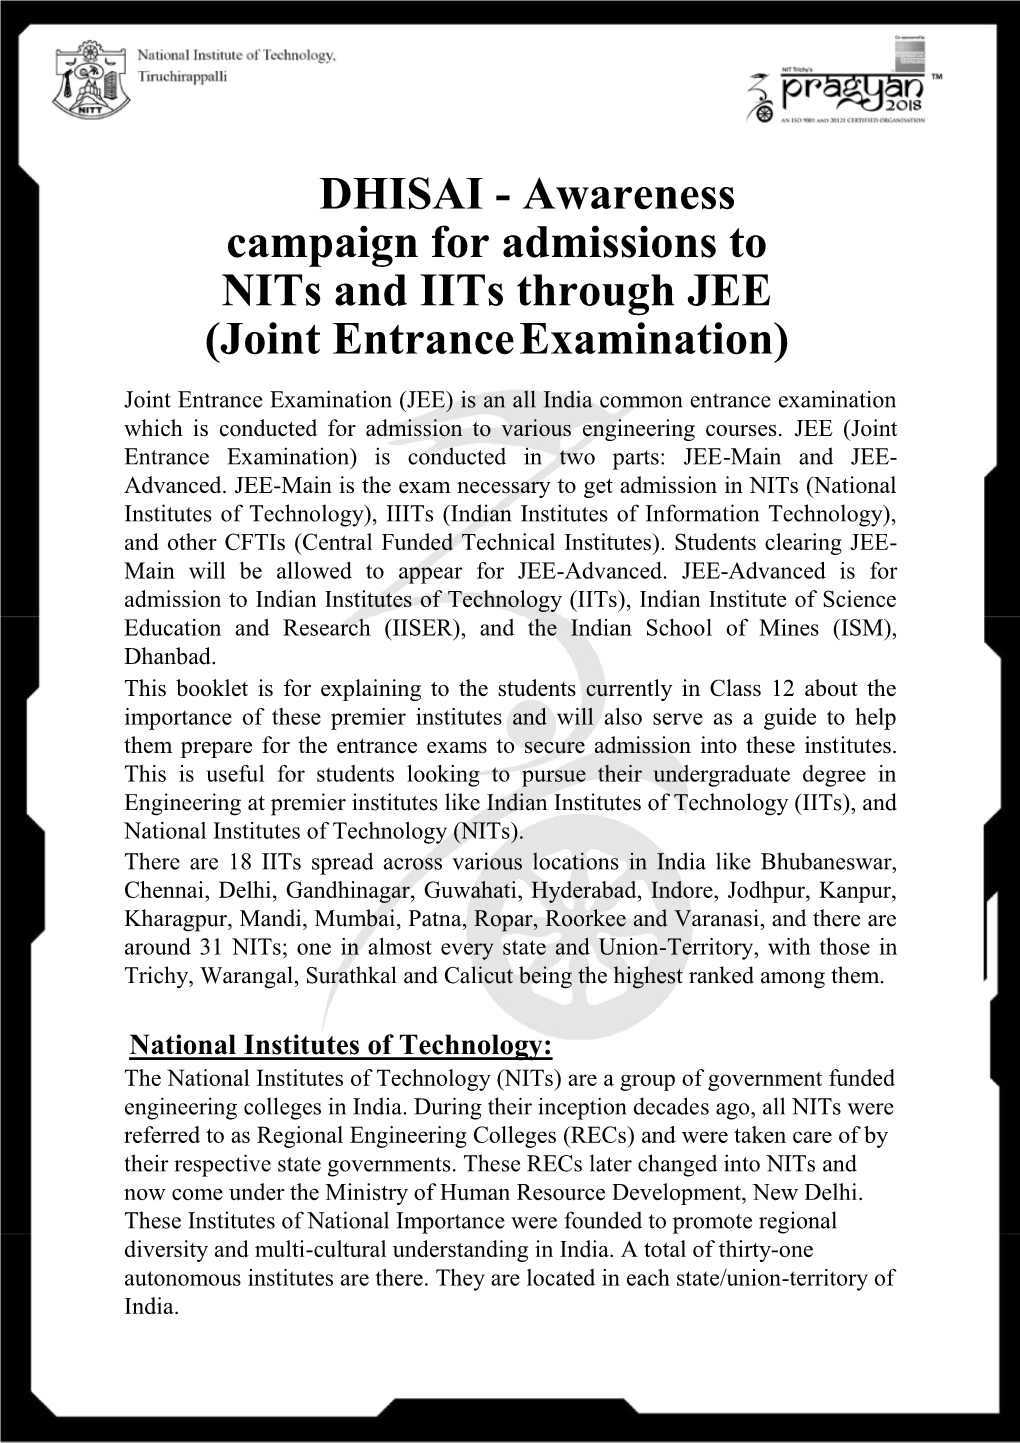 DHISAI - Awareness Campaign for Admissions to Nits and Iits Through JEE